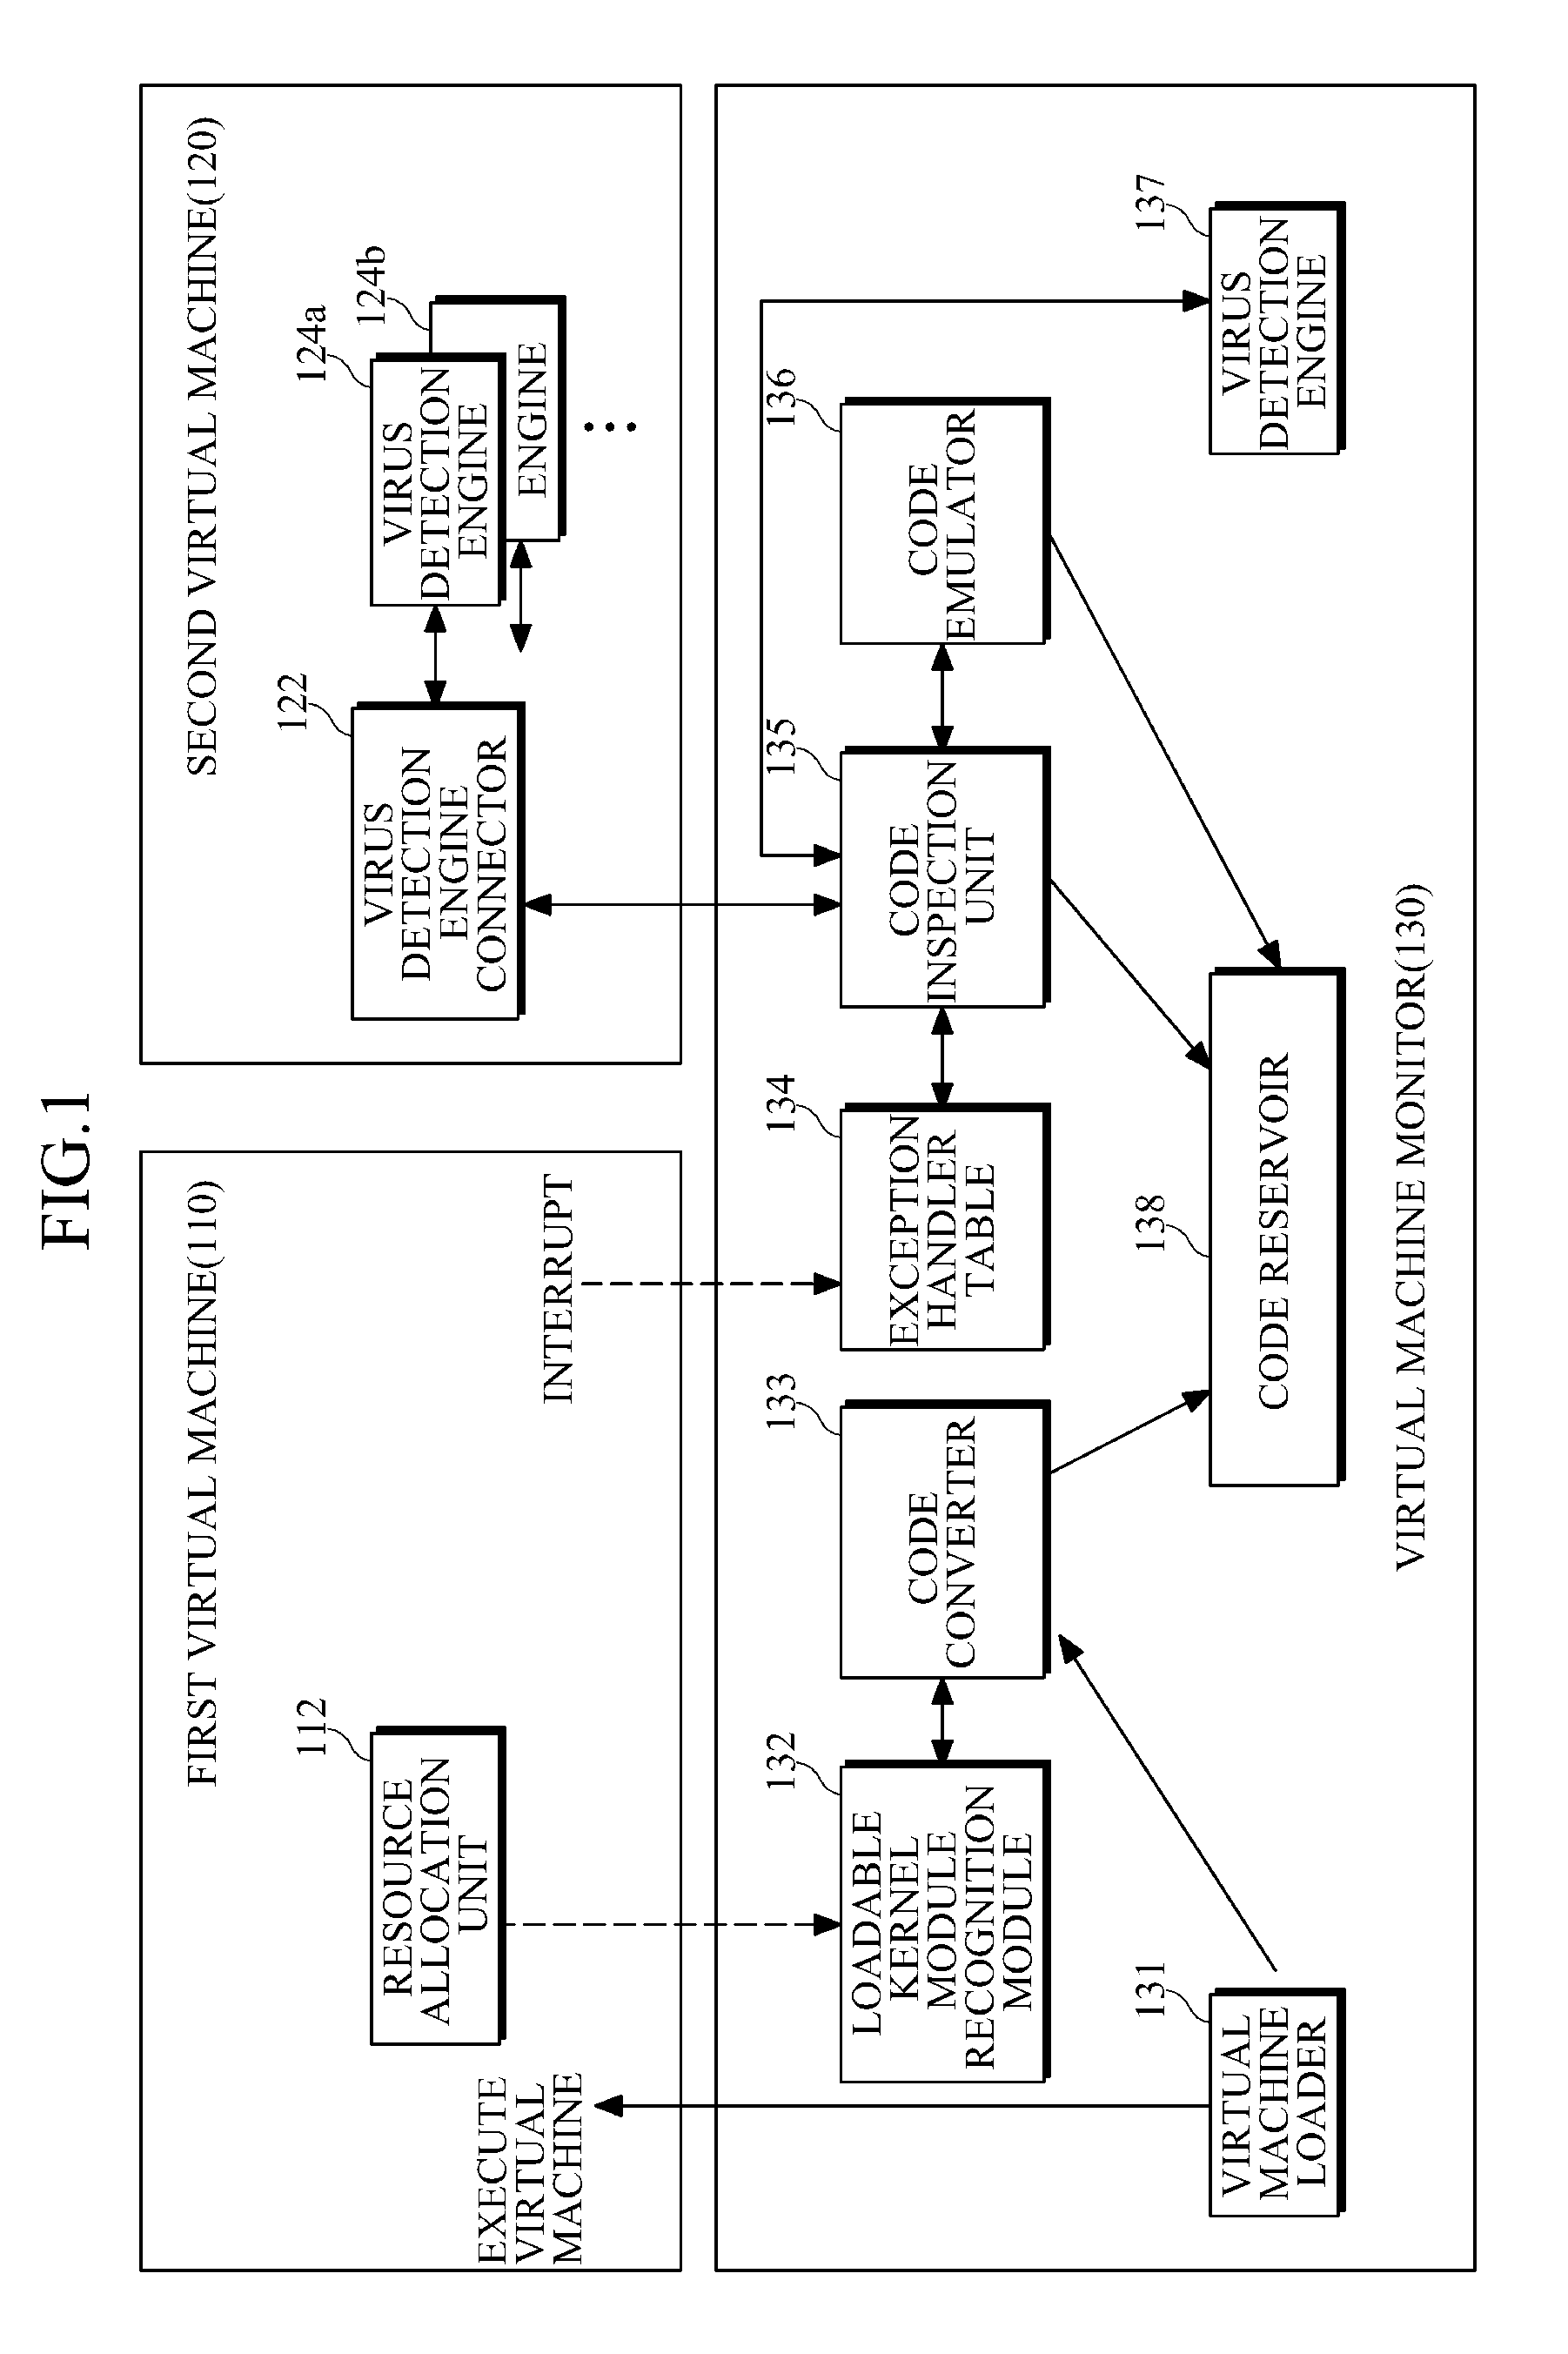 Apparatus and method for preventing virus code execution